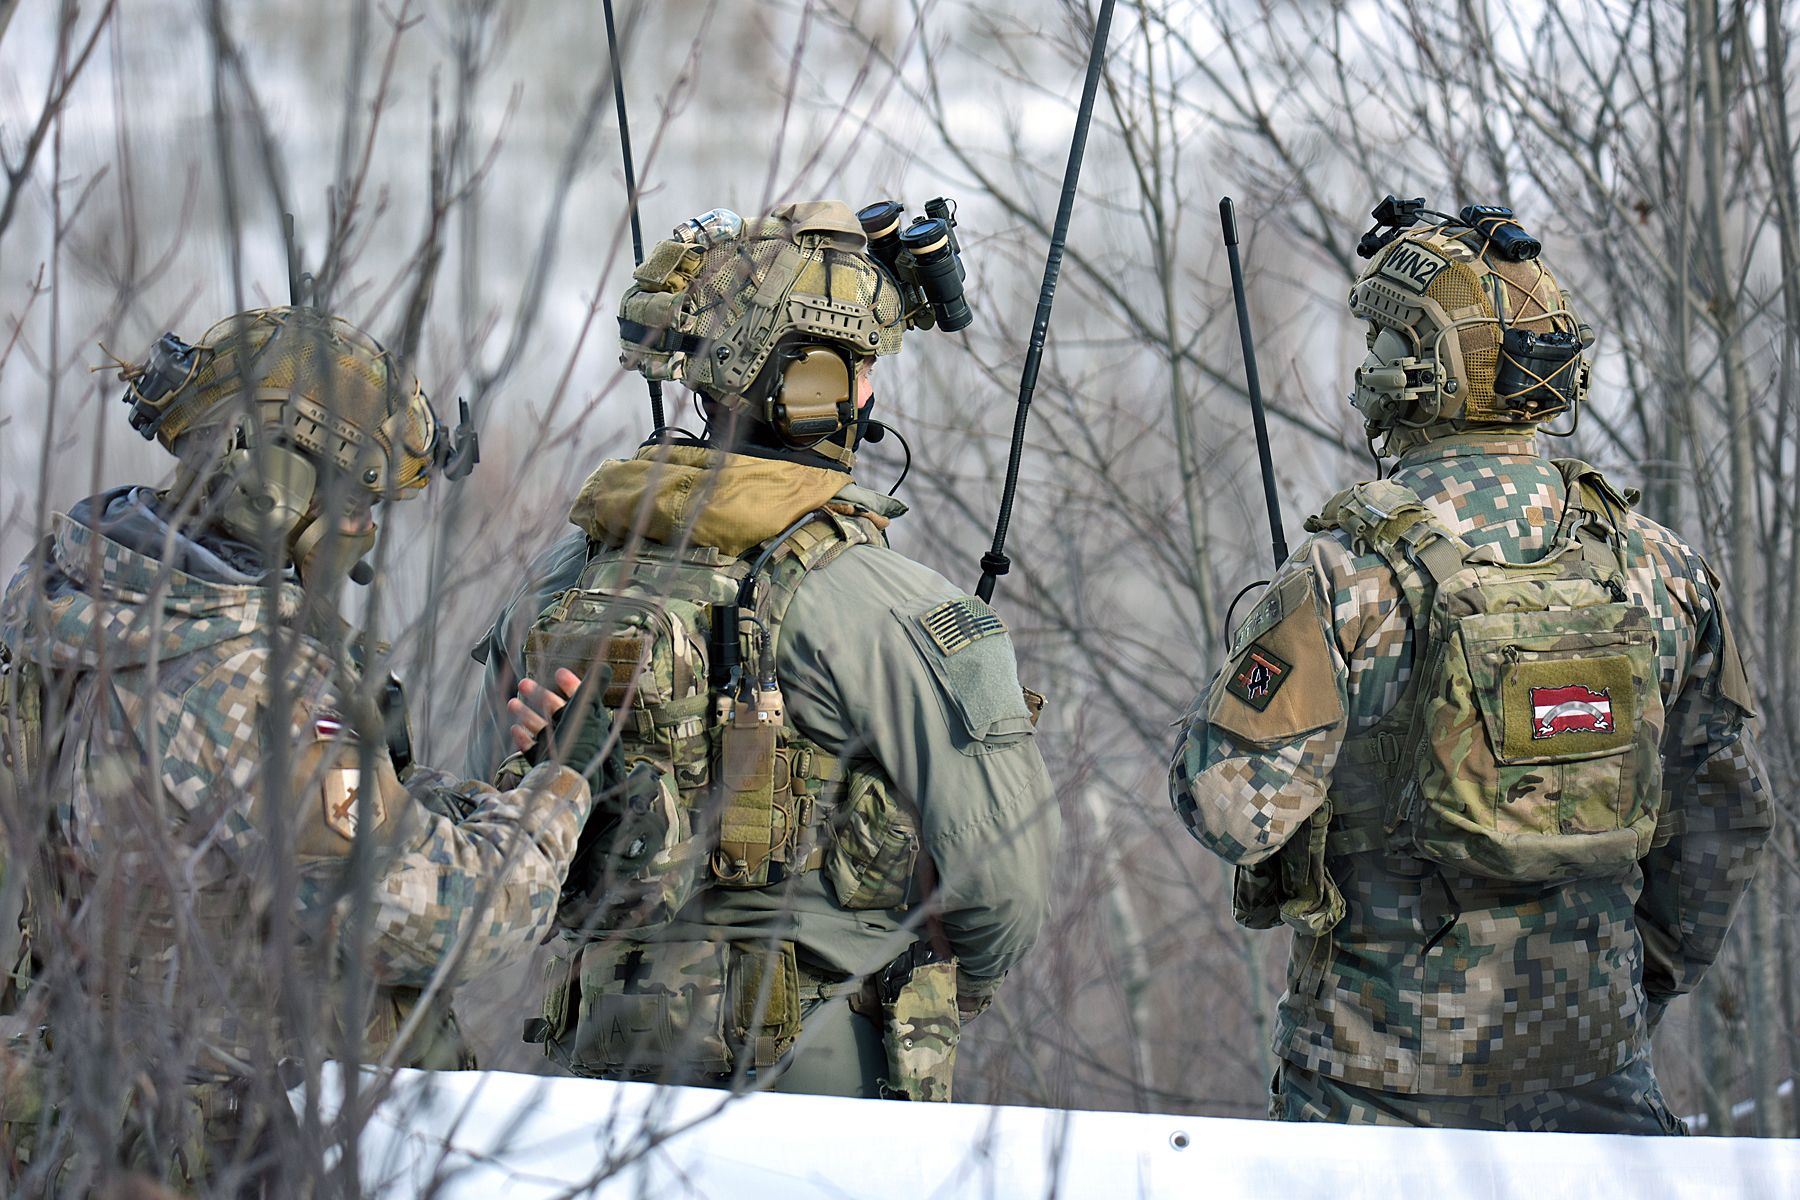 Military personnel from the Latvian National Armed Forces work side-by-side with U.S. Army Soldiers assigned to Battery C, 1st Battalion, 120th Field Artillery Regiment, Wisconsin Army National Guard, while conducting close air support training during Northern Strike 22-1